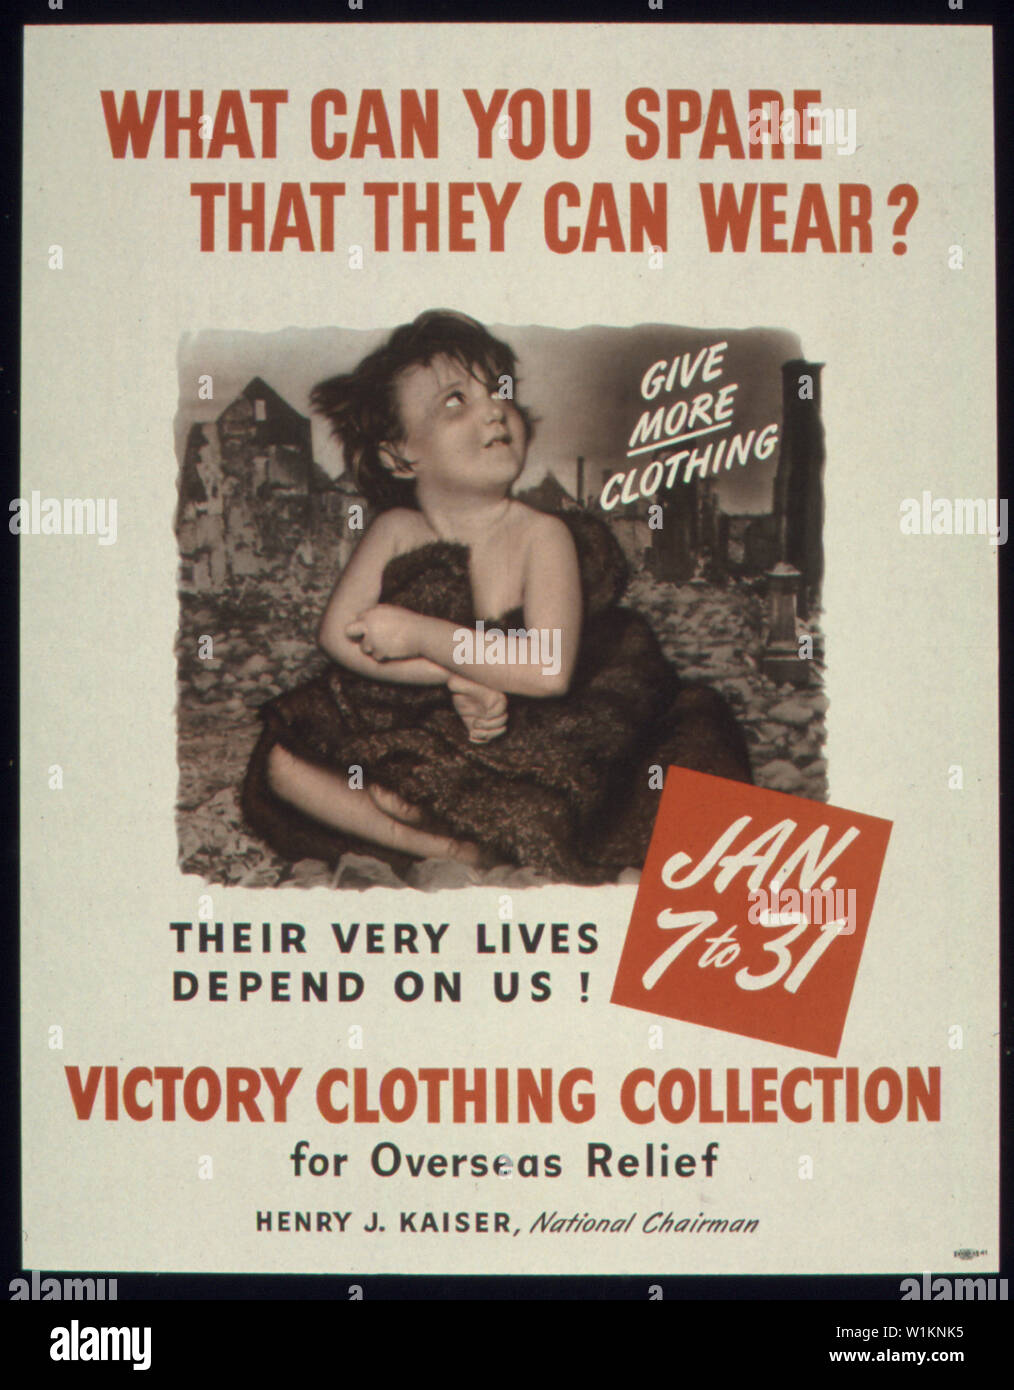 WHAT CAN YOU SPARE THAT THEY CAN WEAR? (VICTORY CLOTHING COLLECTION) Stock Photo